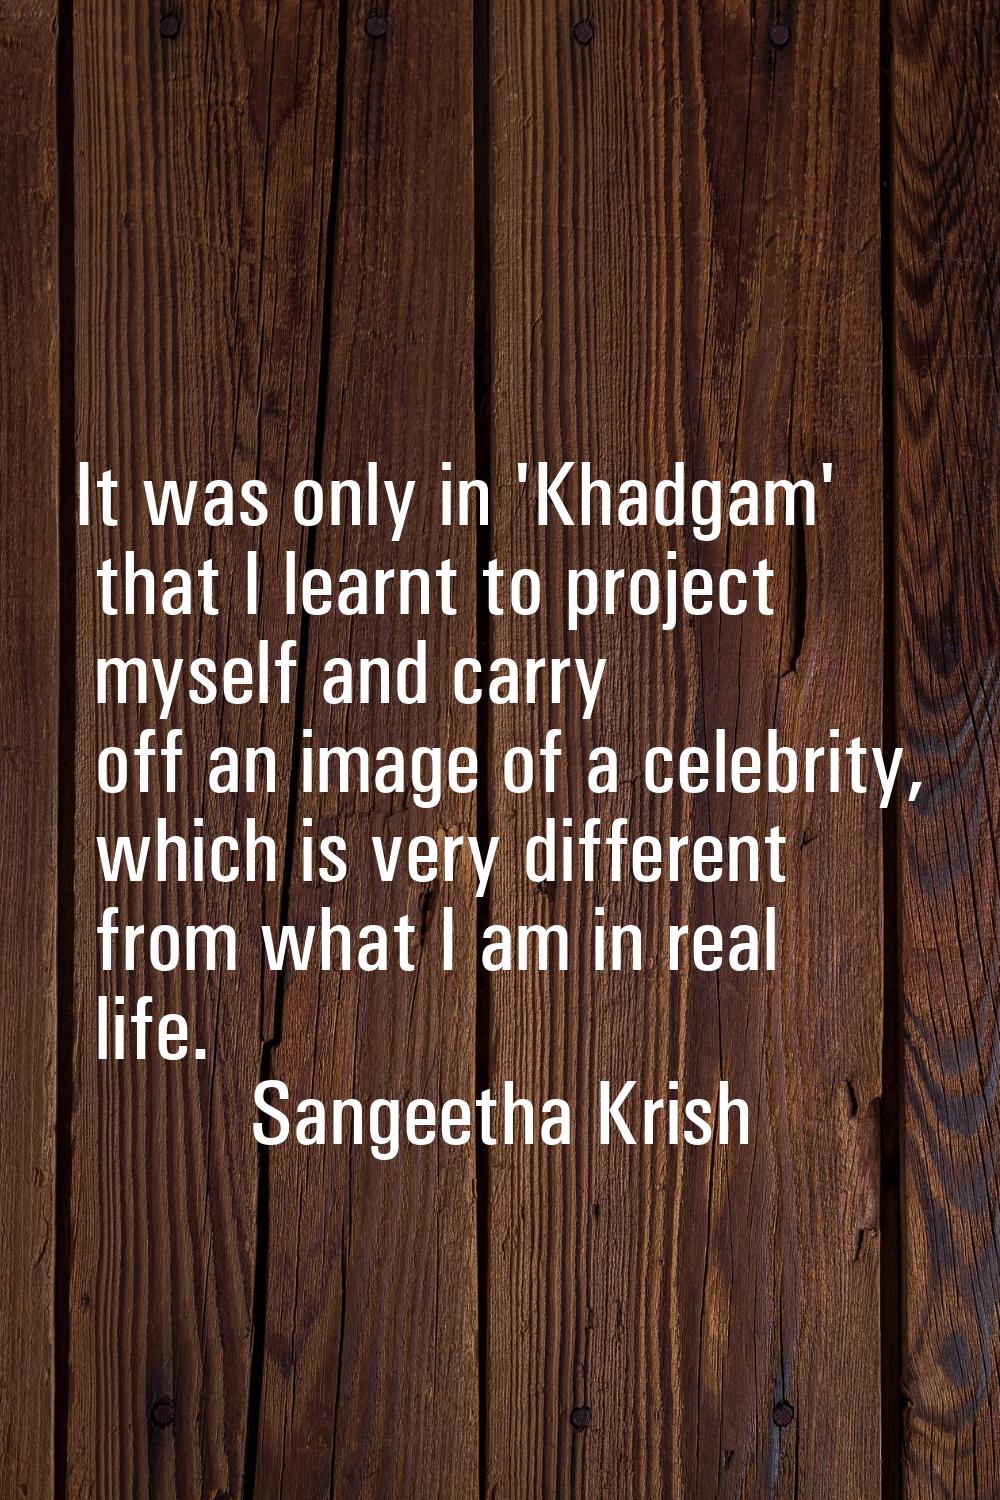 It was only in 'Khadgam' that I learnt to project myself and carry off an image of a celebrity, whi